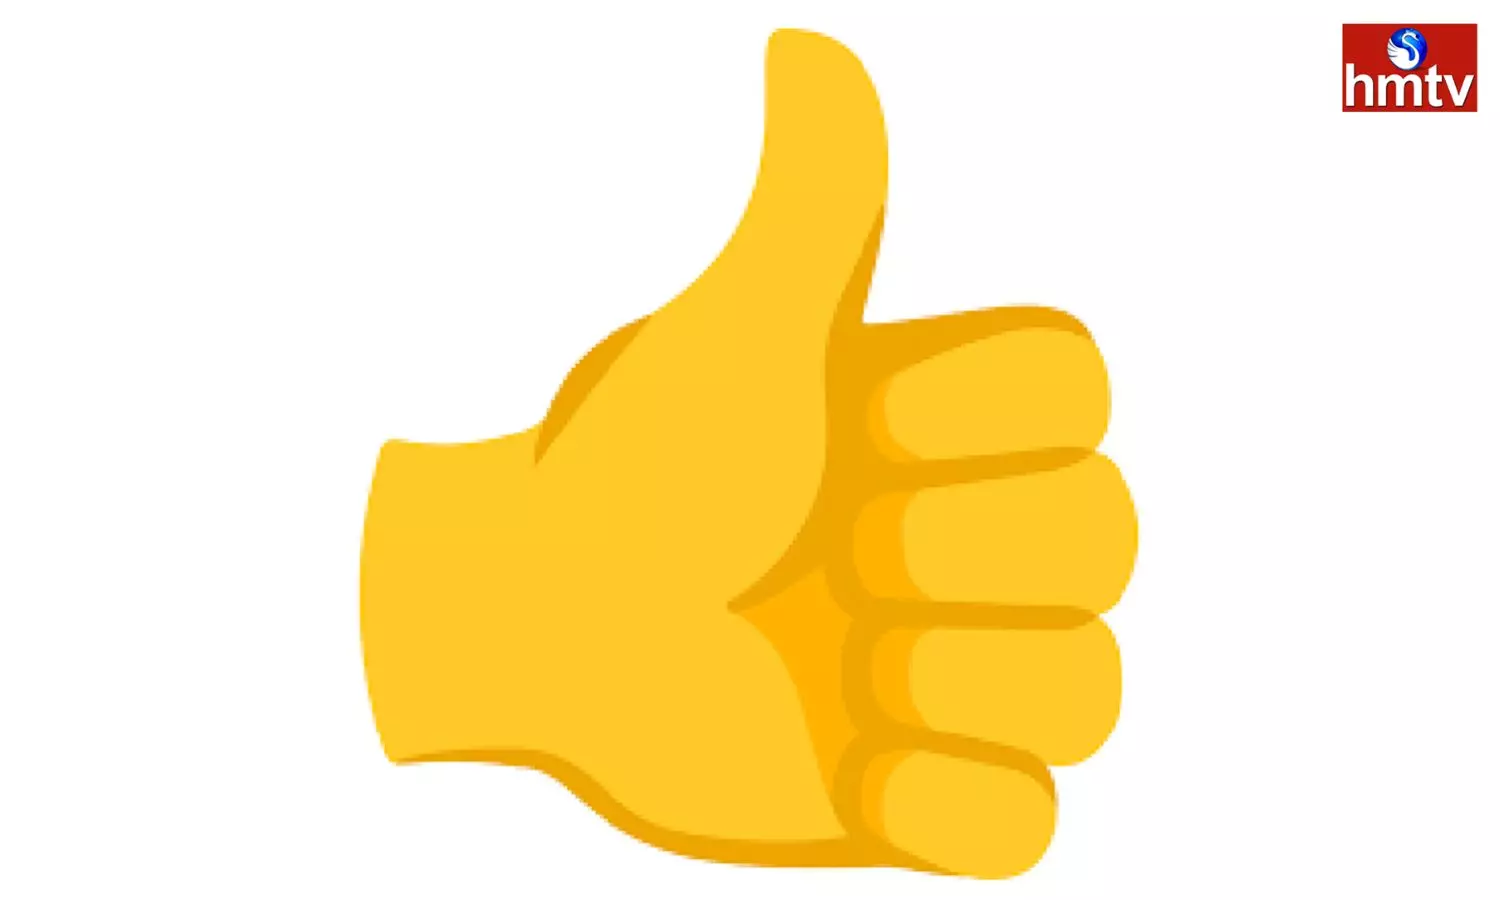 Are you using the Thumps up Emoji you Will Get into Legal Trouble